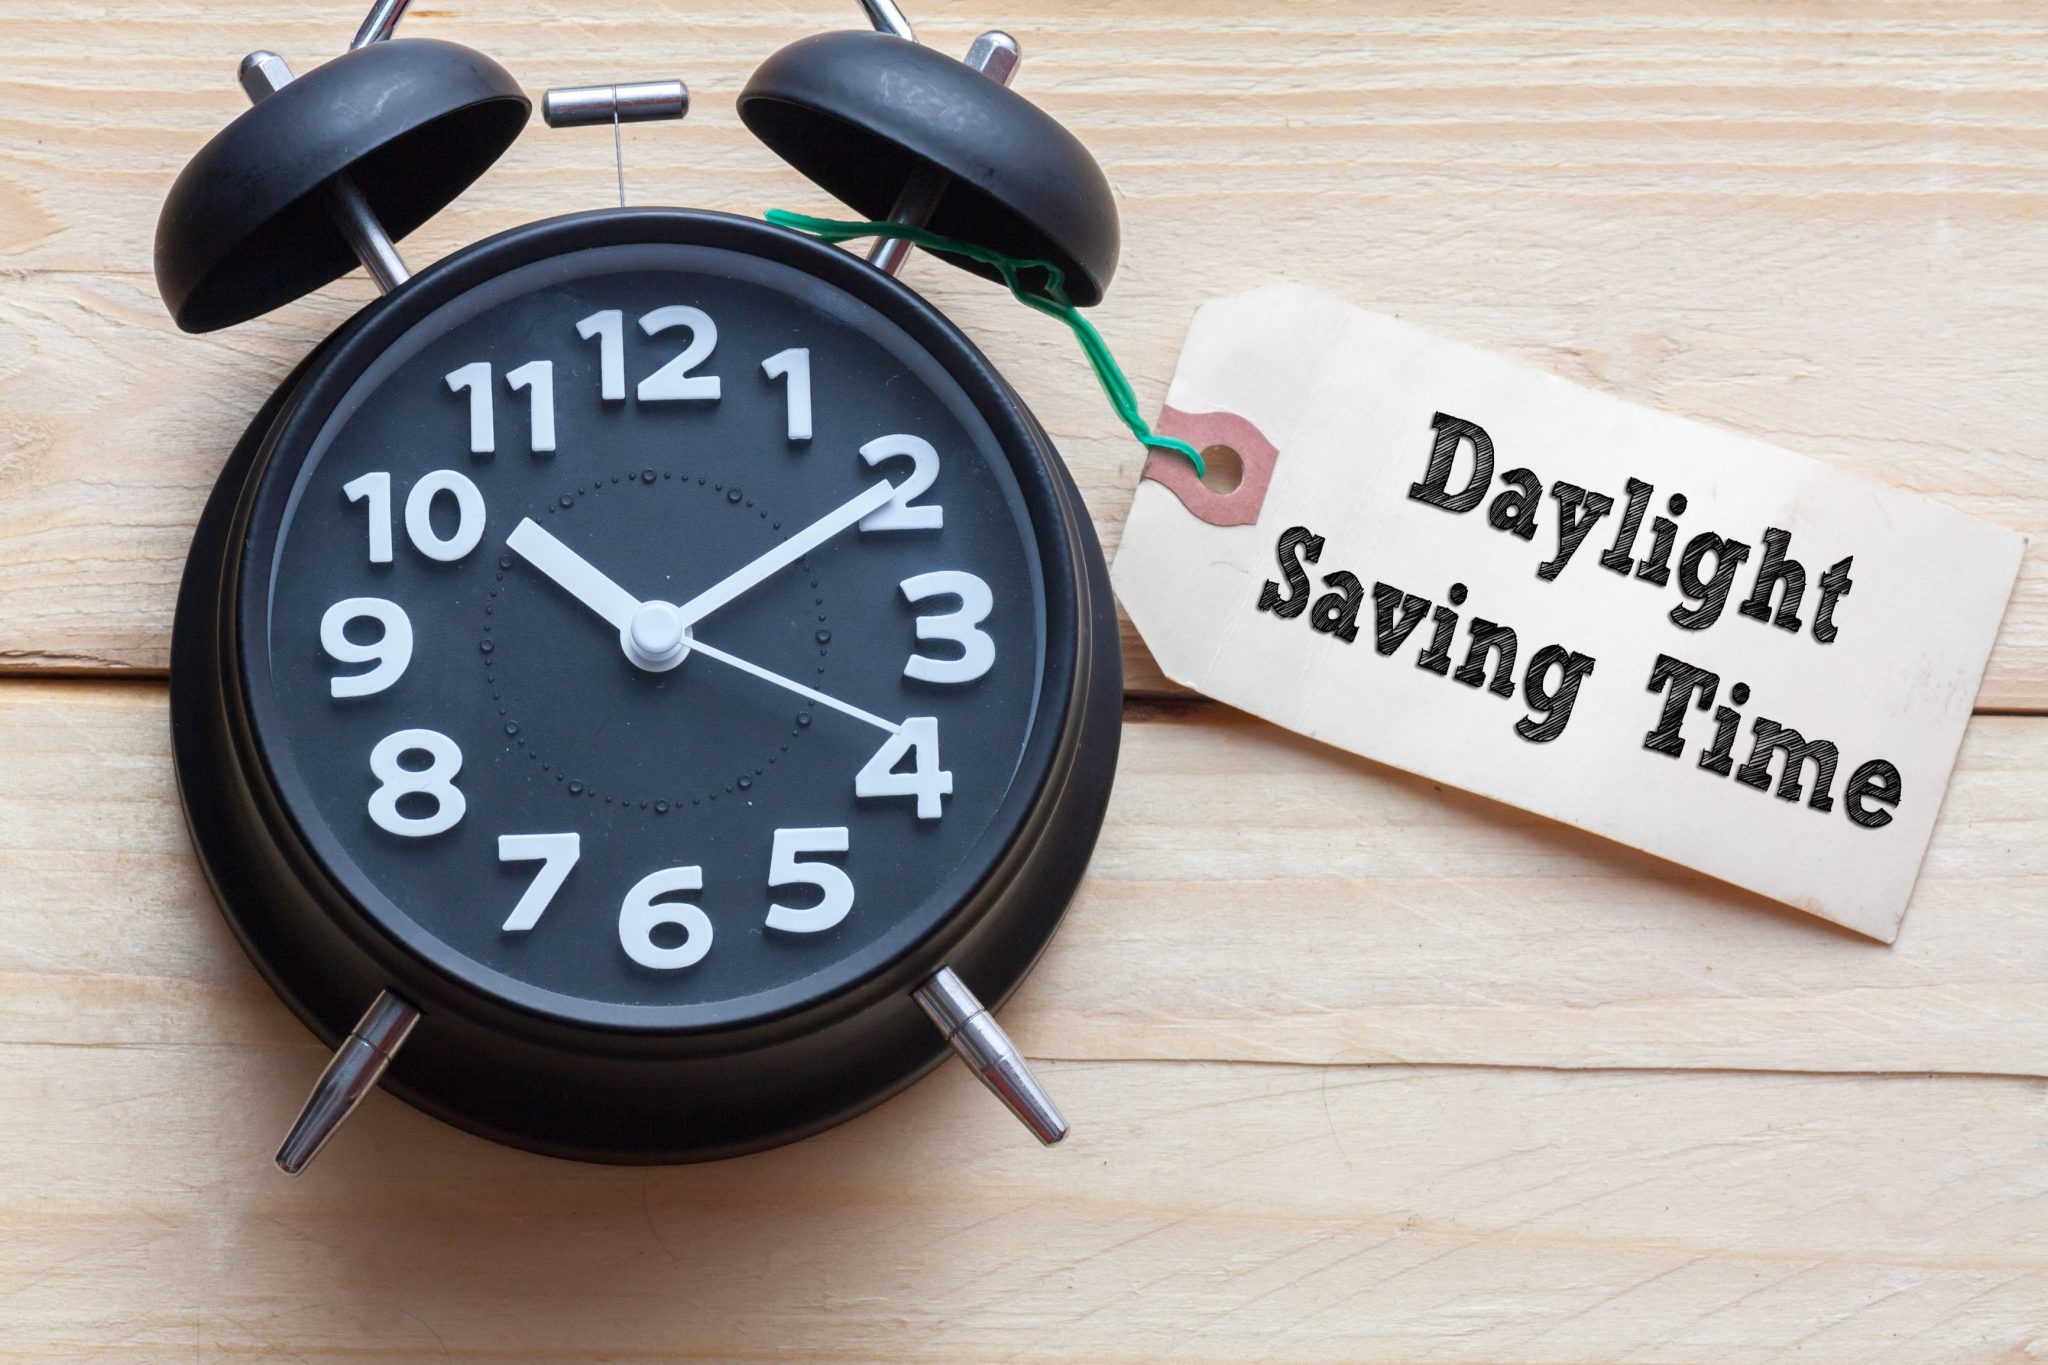 daylight saving time causing car accidents